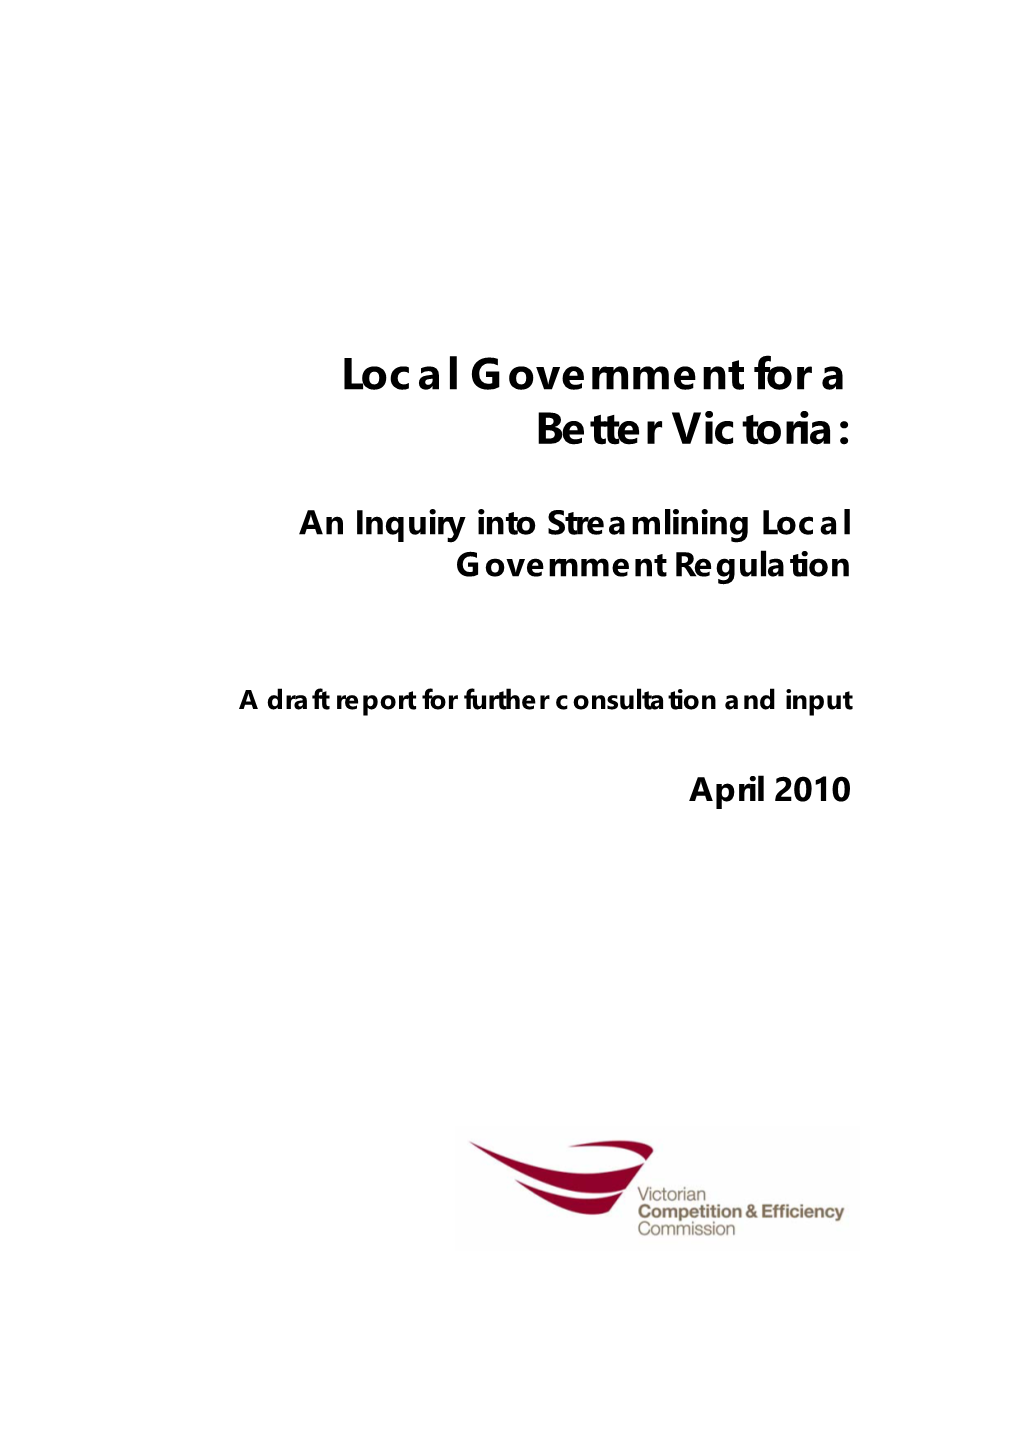 An Inquiry Into Streamlining Local Government Regulation